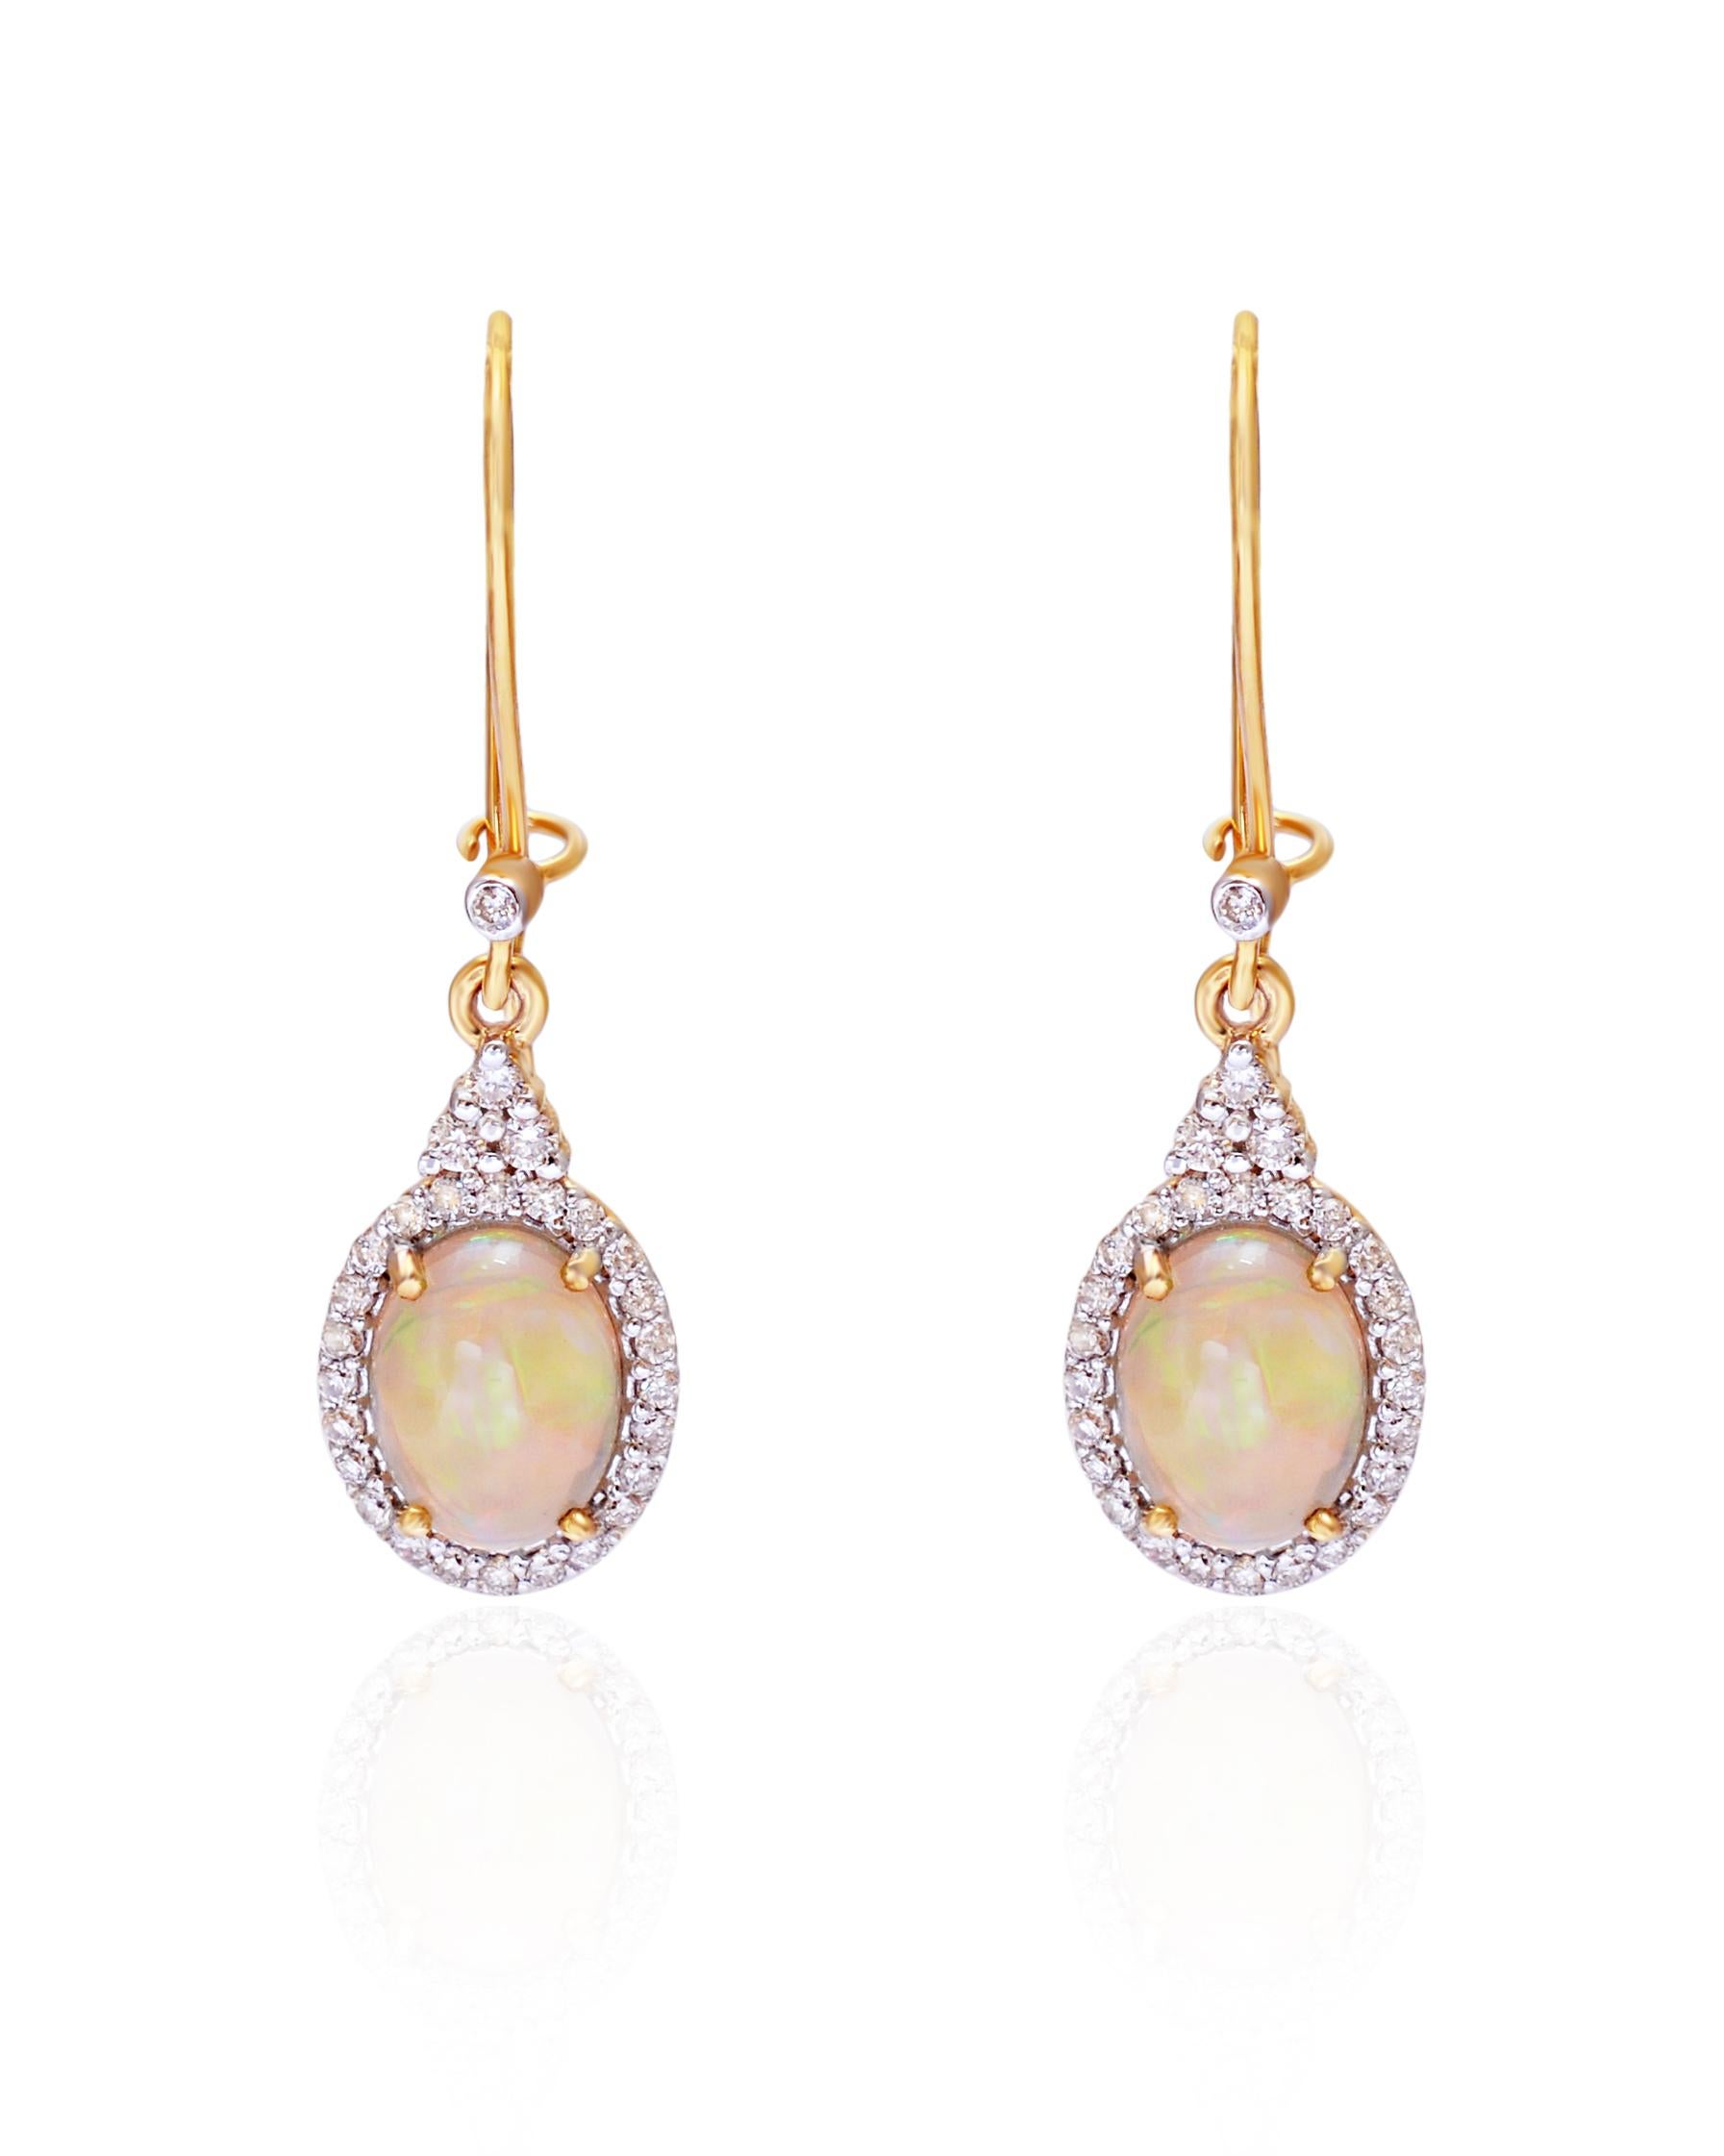 ContemporaryDrop Earrings crafted in 14K Solid Yellow Gold 0.35 Carat Natural Diamond (G-H Color, SI1 SI2 Purity) Opal Gemstone to make your daily wear an affair to remember. 

Specifications

Dimensions: 16*9 MM
Gross Weight: 2.410 gms
Gold Weight: